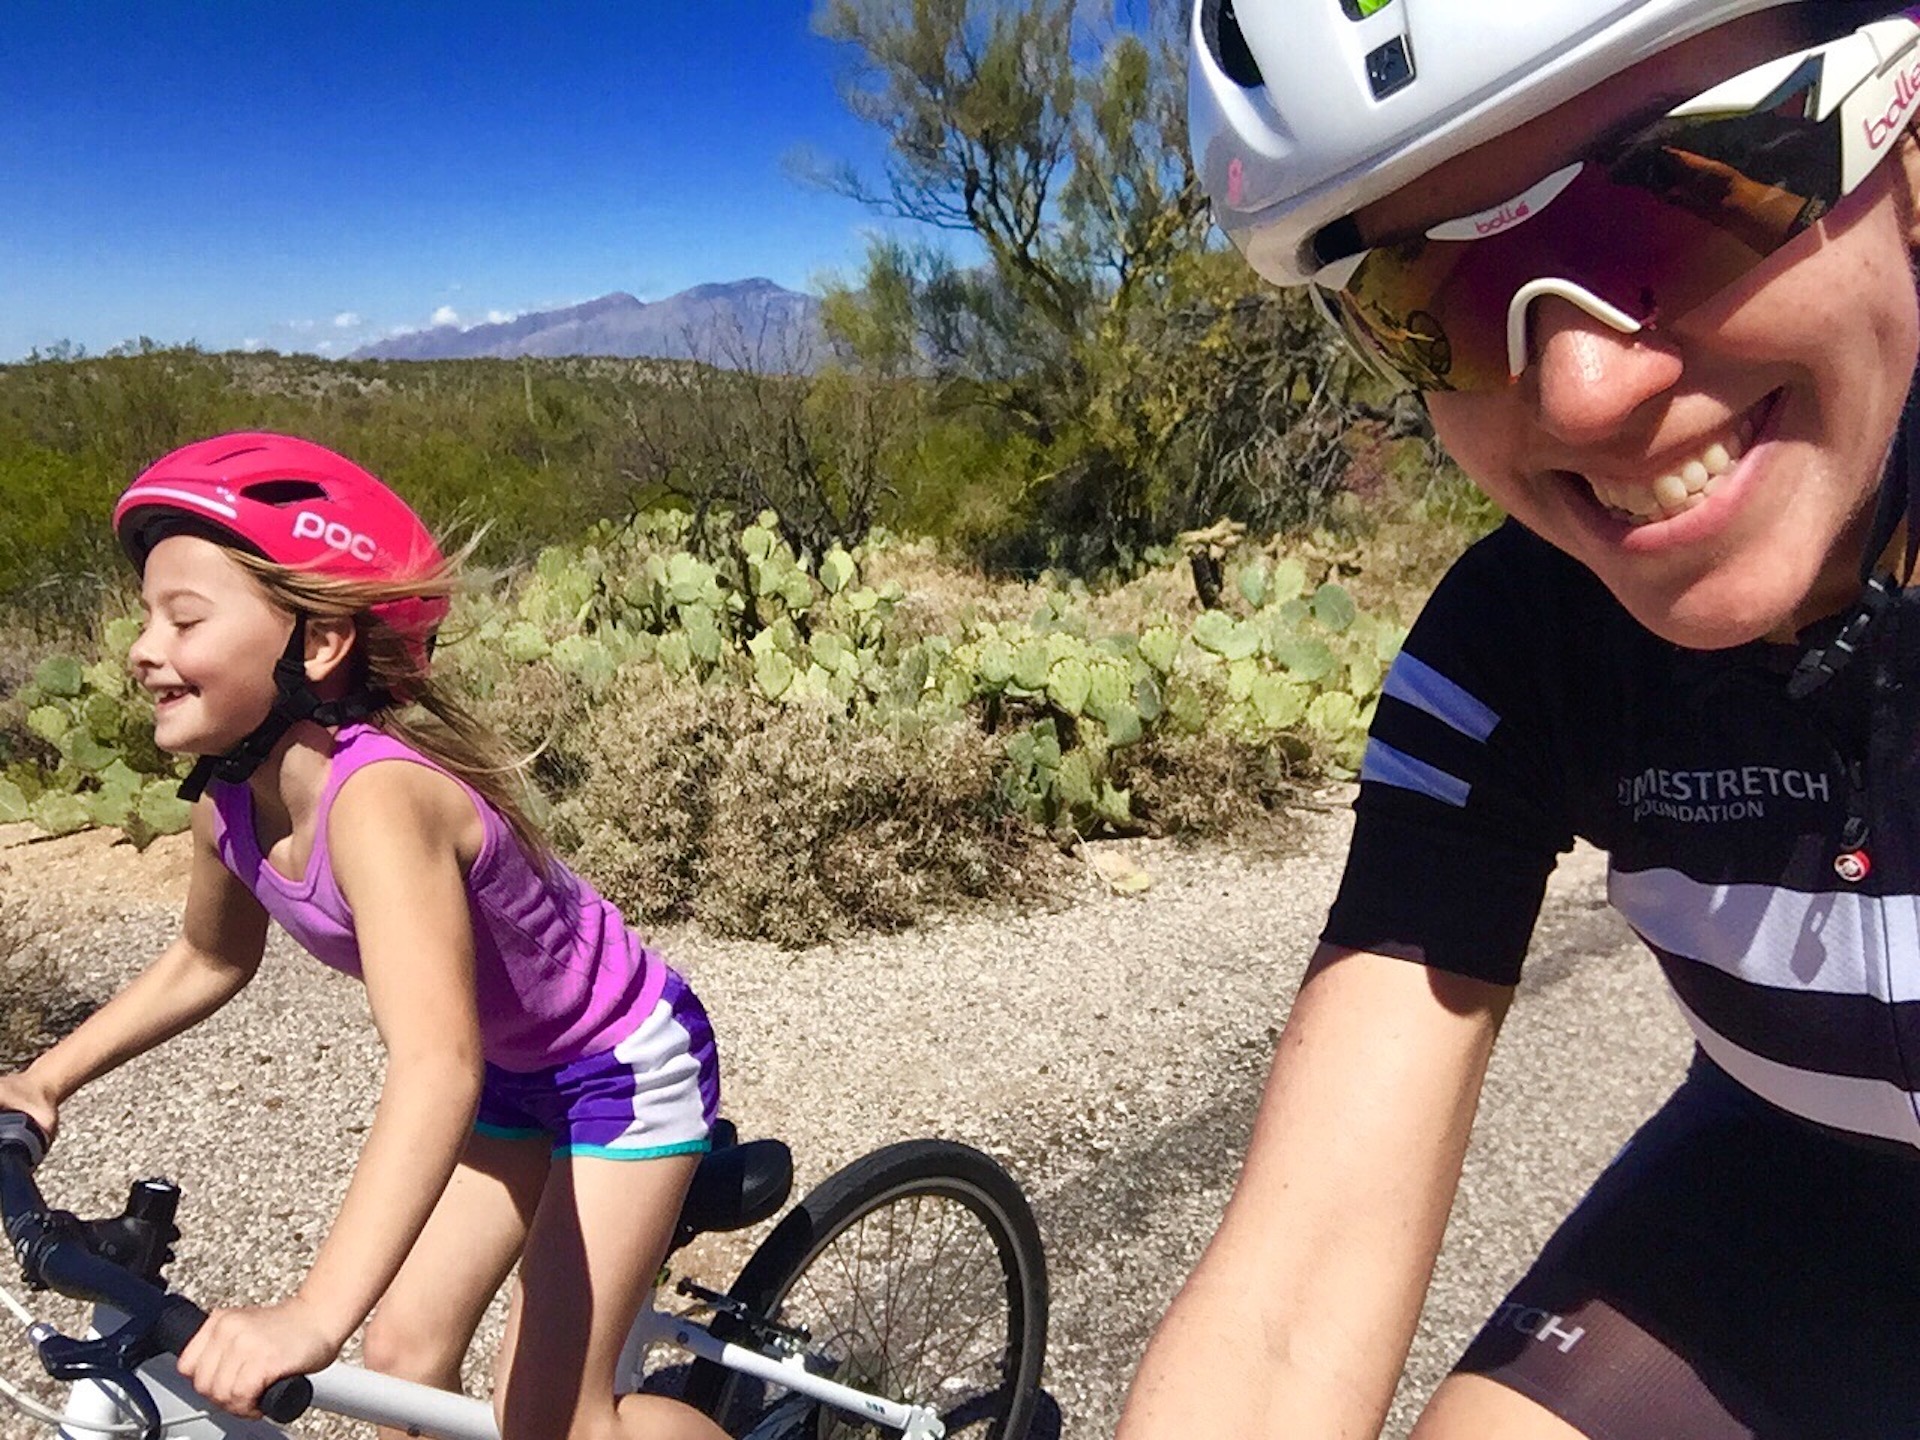 Kathryn Bertine takes a selfie out on a ride with a young girl, Ava, who she met while riding. Both have wide smiles, and Ava is obviously half-wheeling Kathryn.